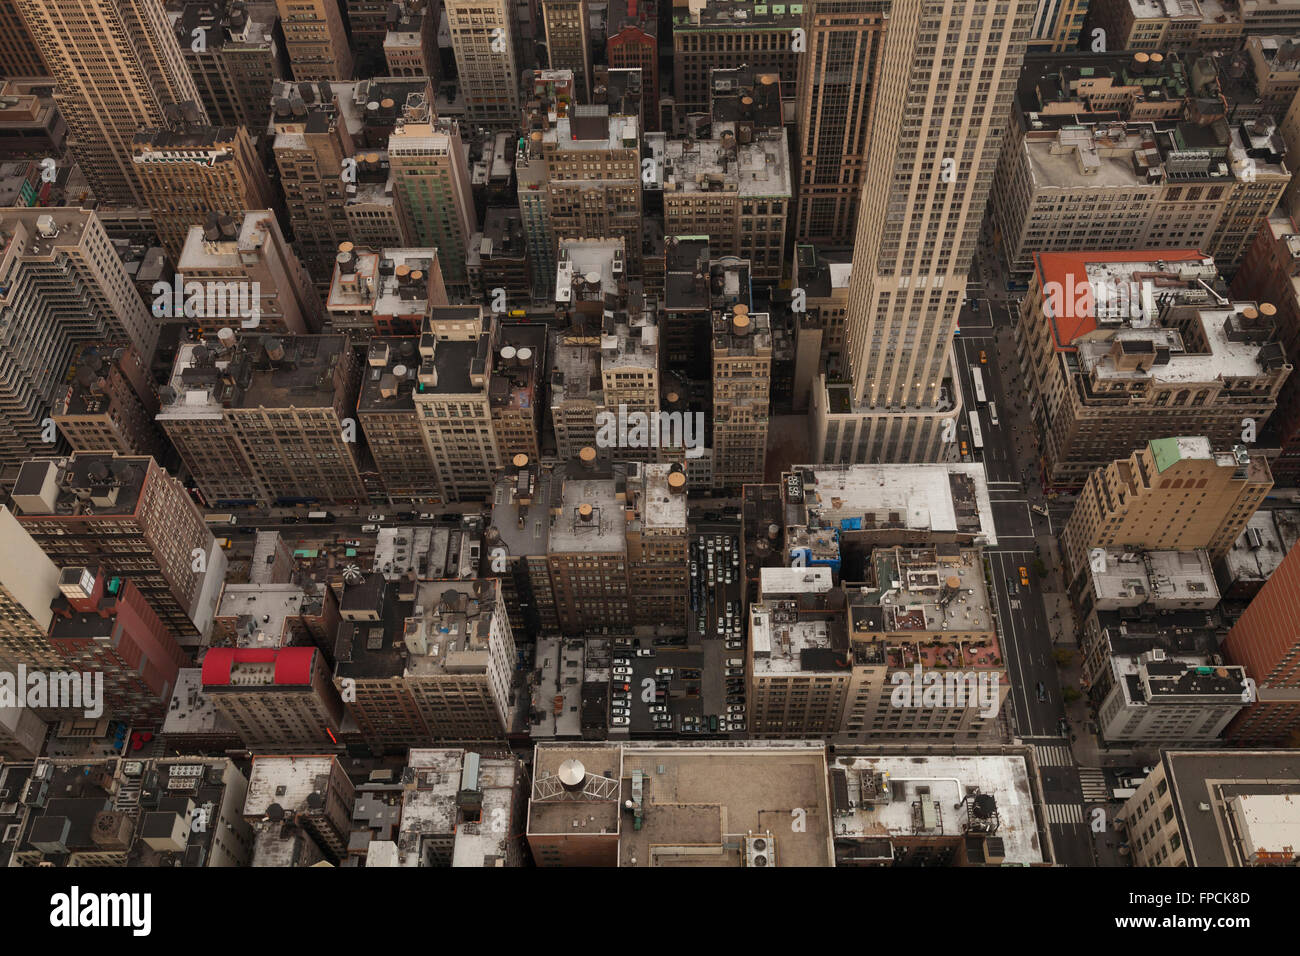 A look down onto skyscrapers and high rises densely packed together on Manhattan streets from the top of the Empire State Building. Stock Photo